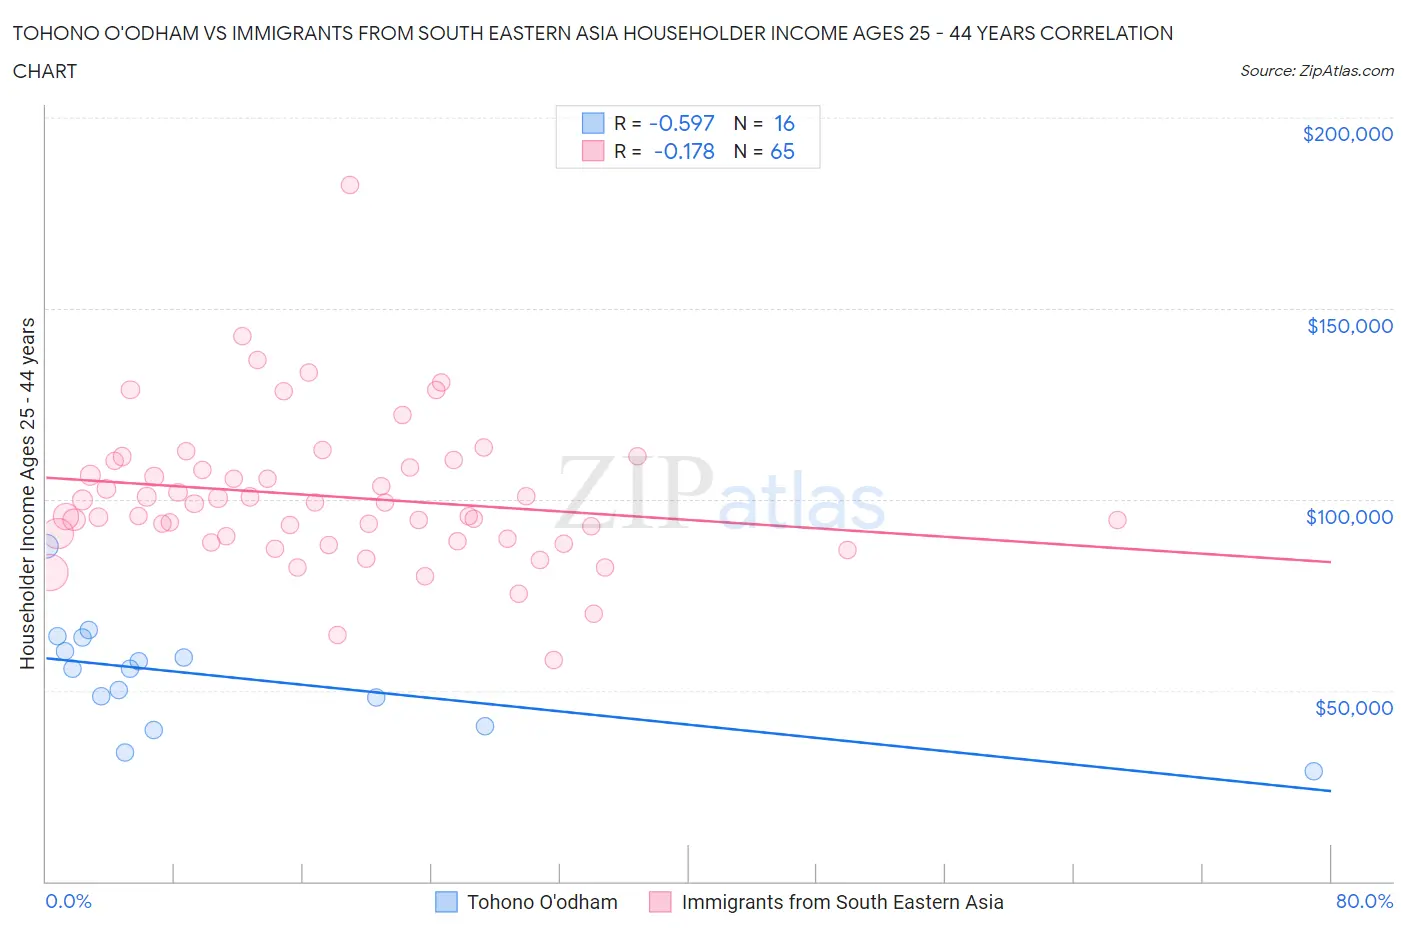 Tohono O'odham vs Immigrants from South Eastern Asia Householder Income Ages 25 - 44 years